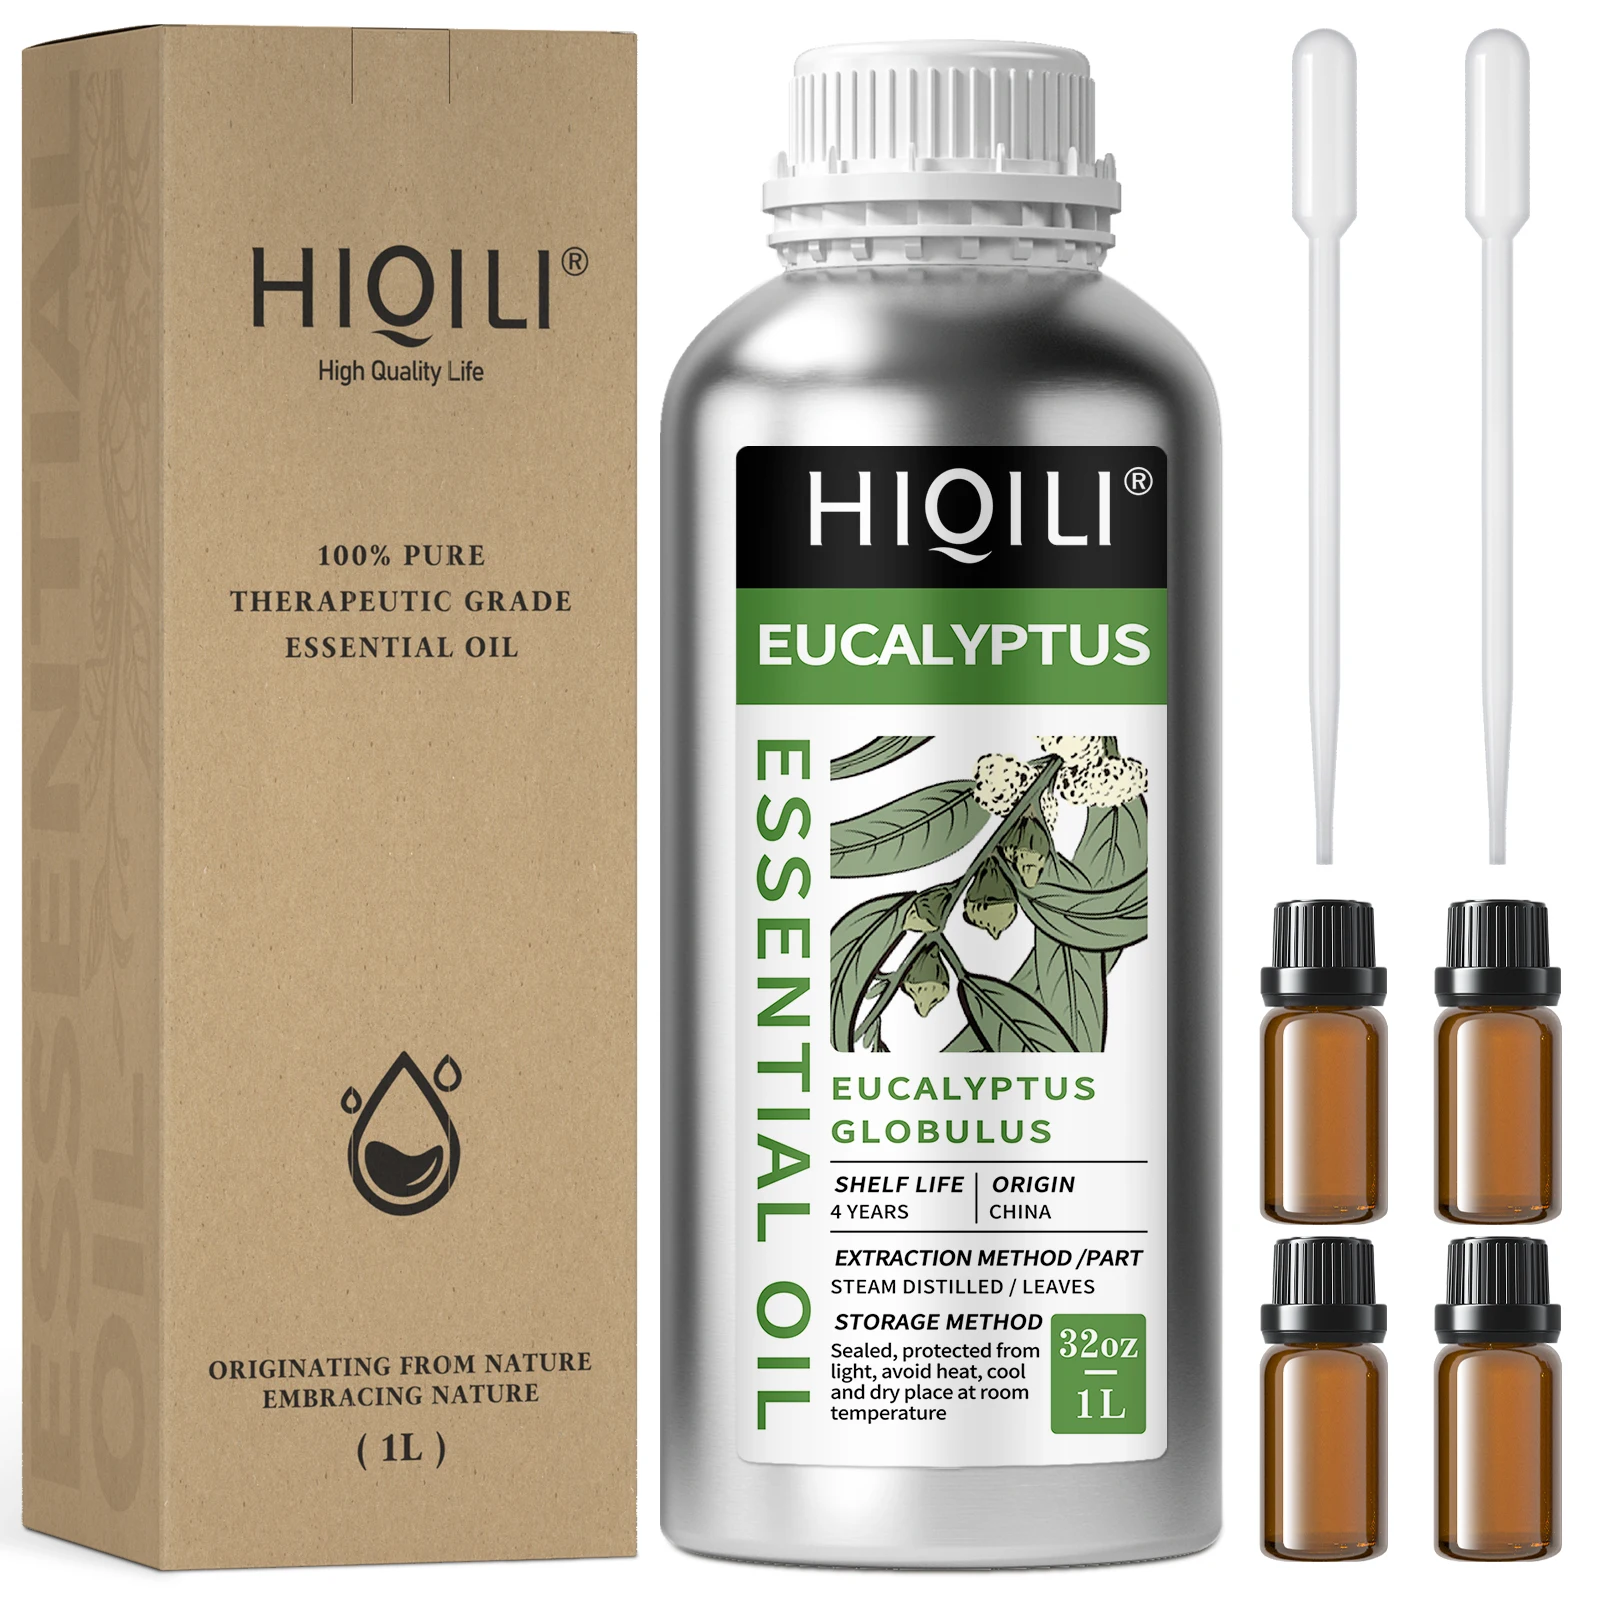 HIQILI 1000 ML Eucalyptus Essential Oils, 100% Pure Nature for Aromatherapy Used for Diffuser, Humidifier, Massage, Prevent Cold